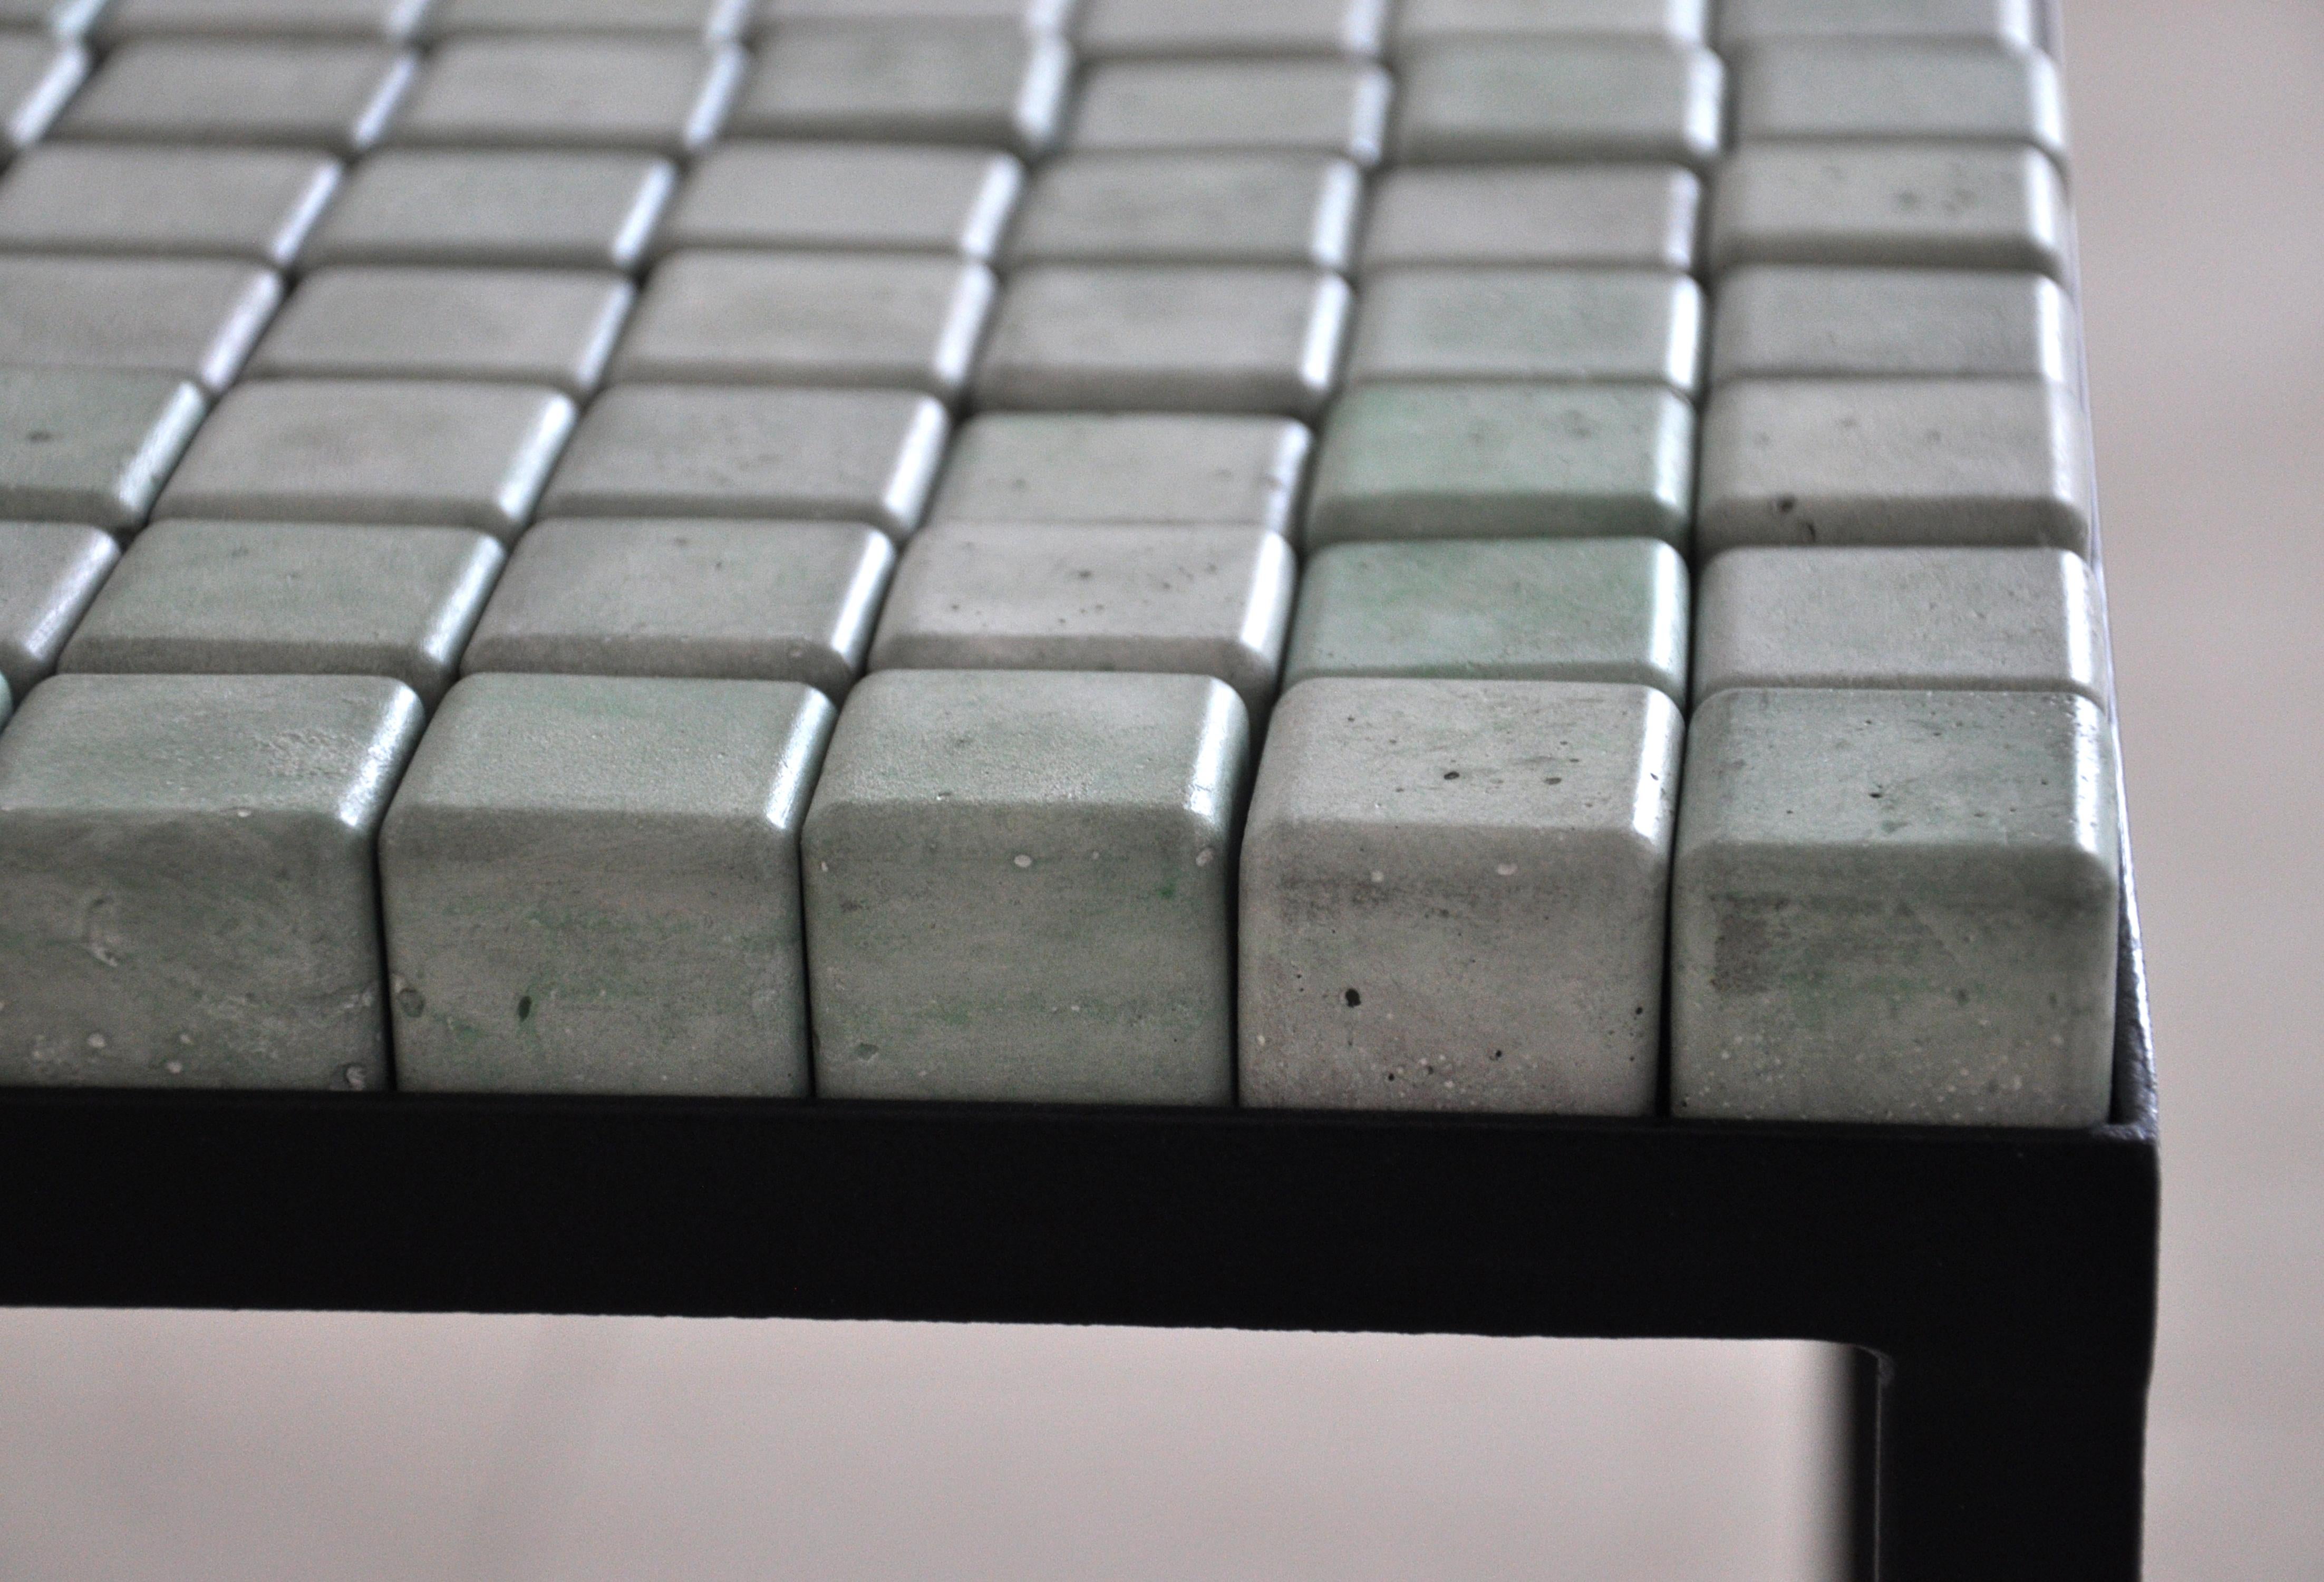 Brazilian Contemporary Minimal Concrete Cubes Table, one-of-a-kind by Miriam Loellmann For Sale